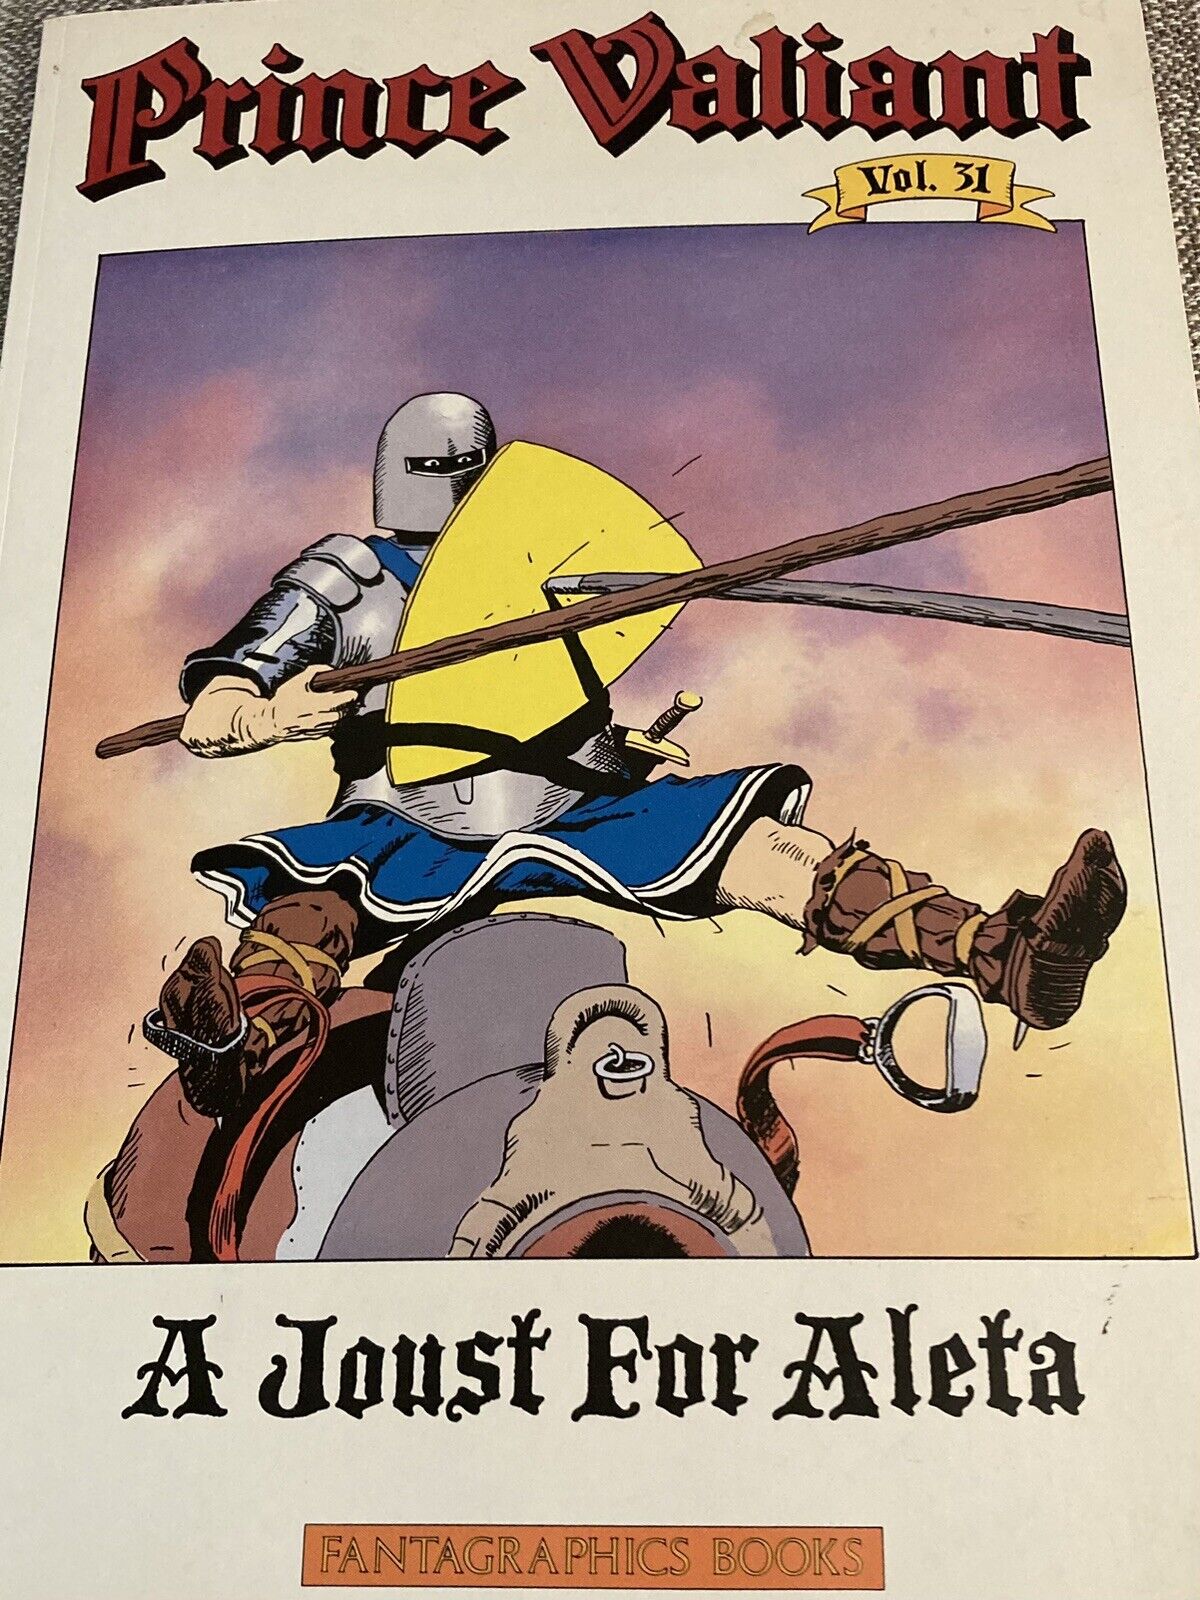 PRINCE VALIANT Vol 31 A Joust For Aleta Fantagraphics TPB 2nd Print Hal Foster